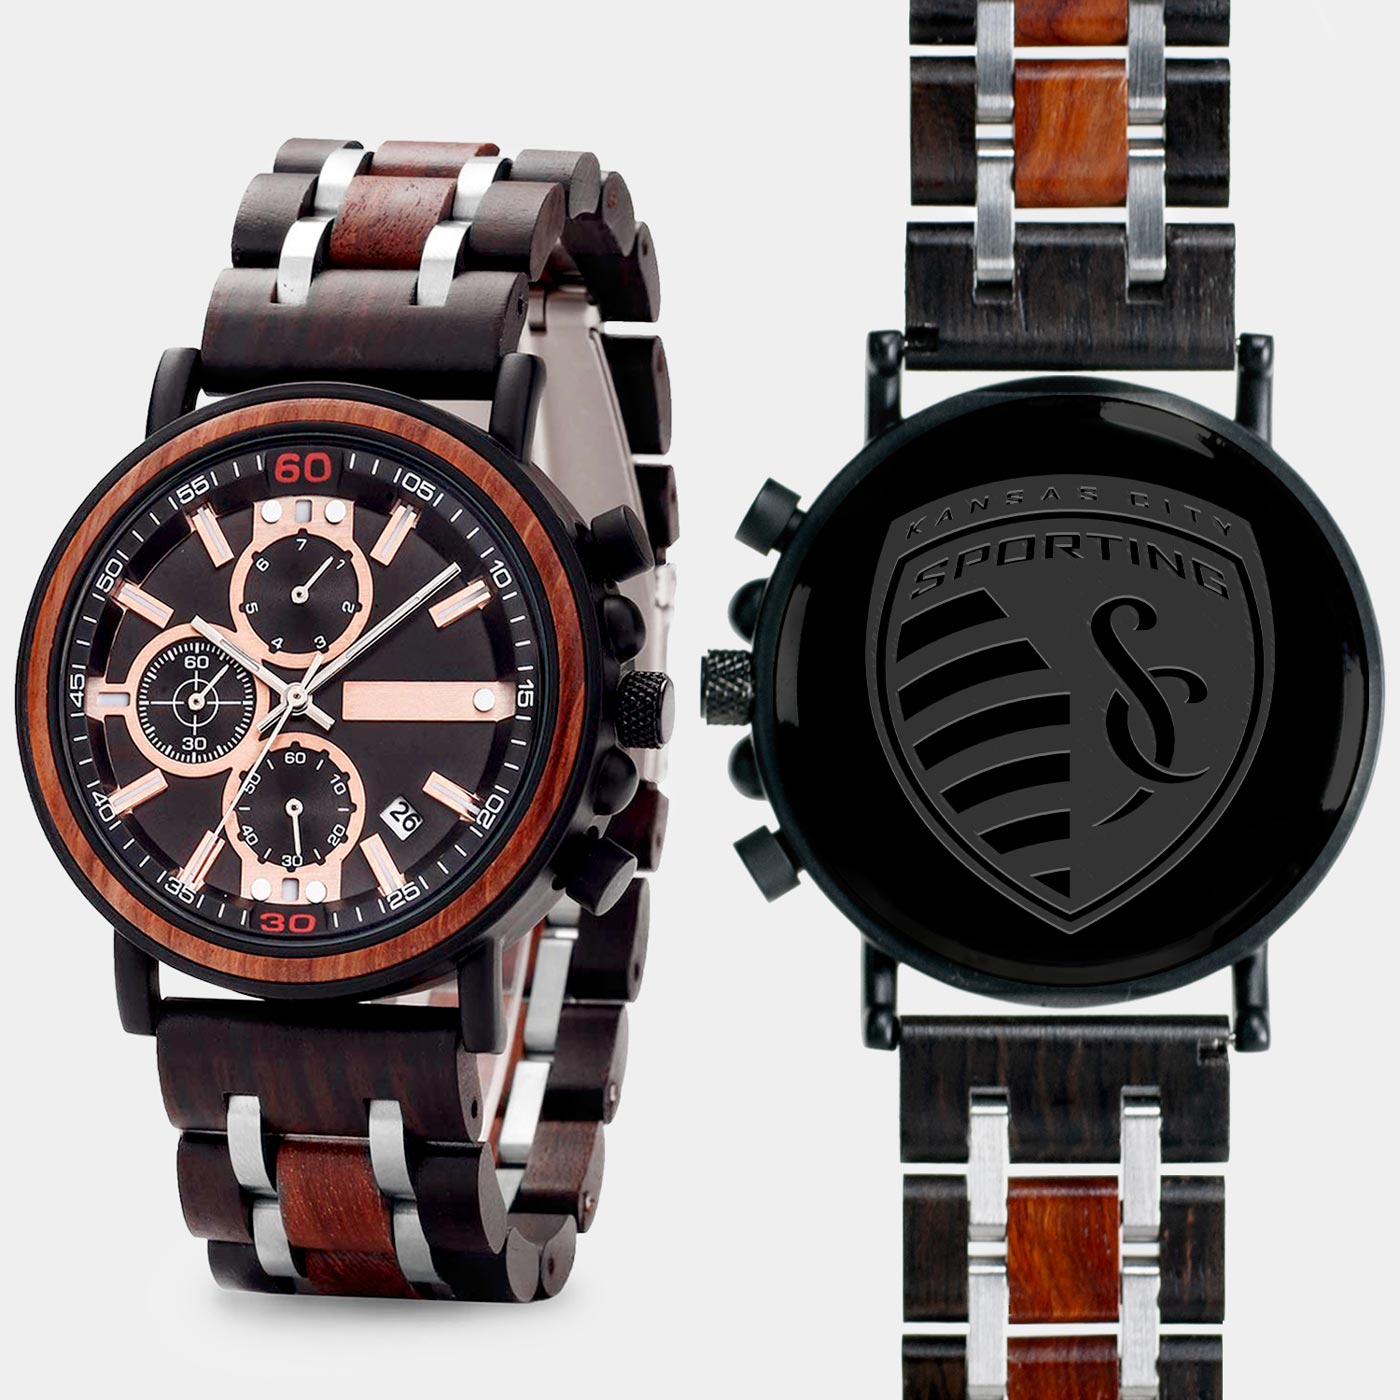 Sporting Kansas City Mens Wrist Watch  - Personalized Sporting Kansas City Mens Watches - Custom Gifts For Him, Birthday Gifts, Gift For Dad - Best 2022 Sporting Kansas City Christmas Gifts - Black 45mm MLS Wood Watch